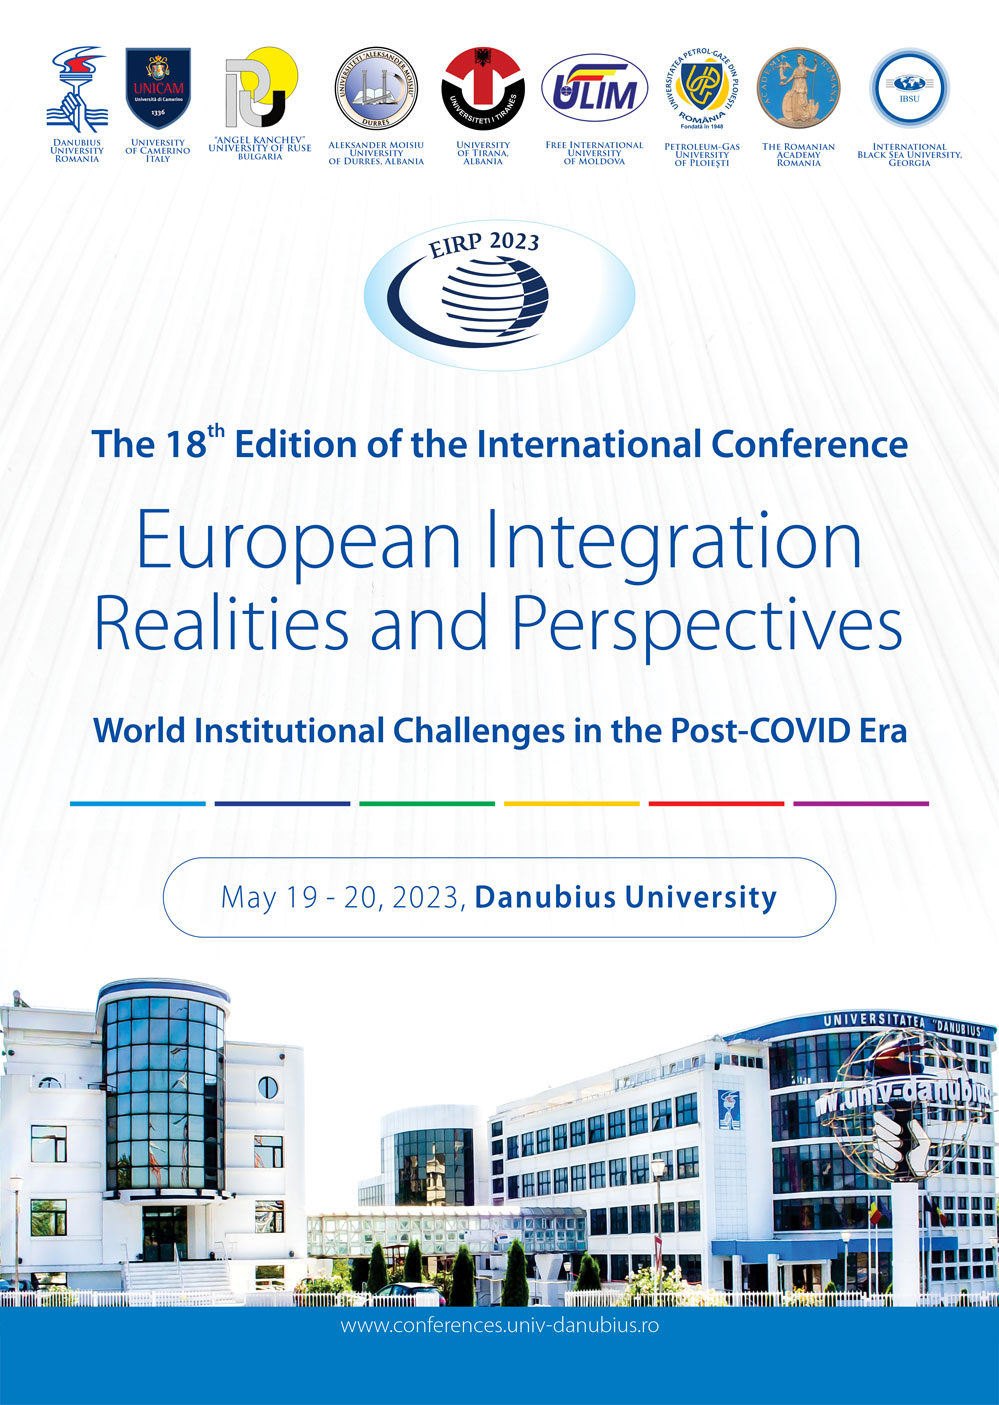  EIRP 2023 - World Institutional Challenges in the Post-COVID Era